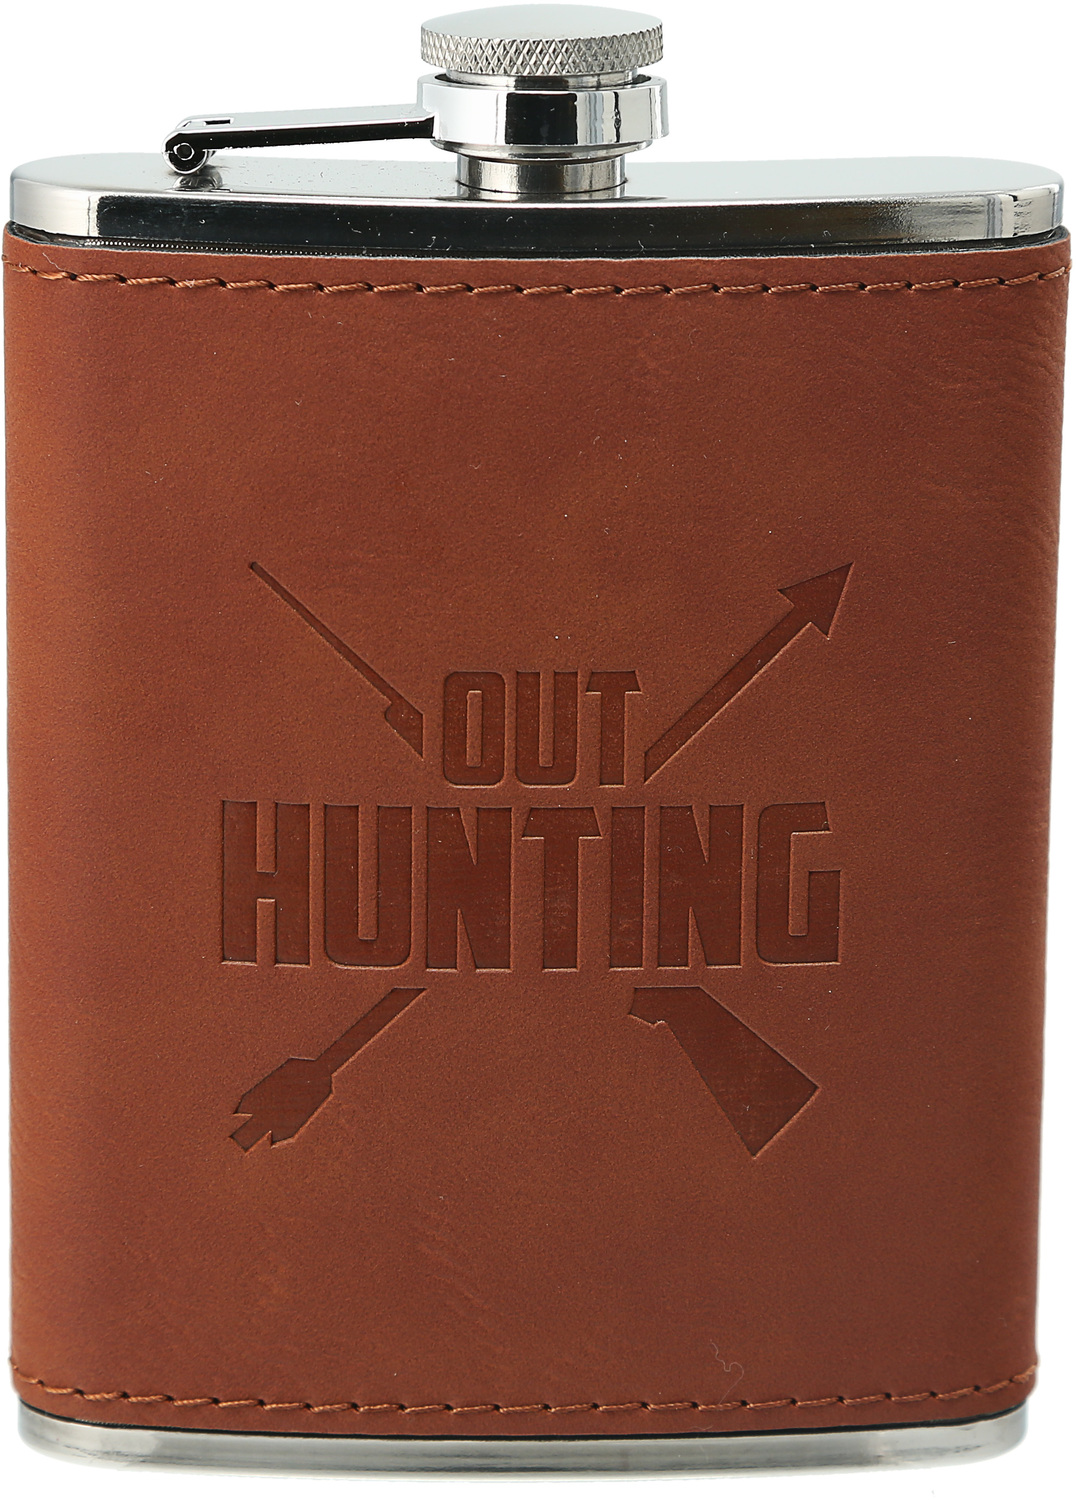 Out Hunting by Man Out - Out Hunting - PU Leather & Stainless Steel 8 oz Flask